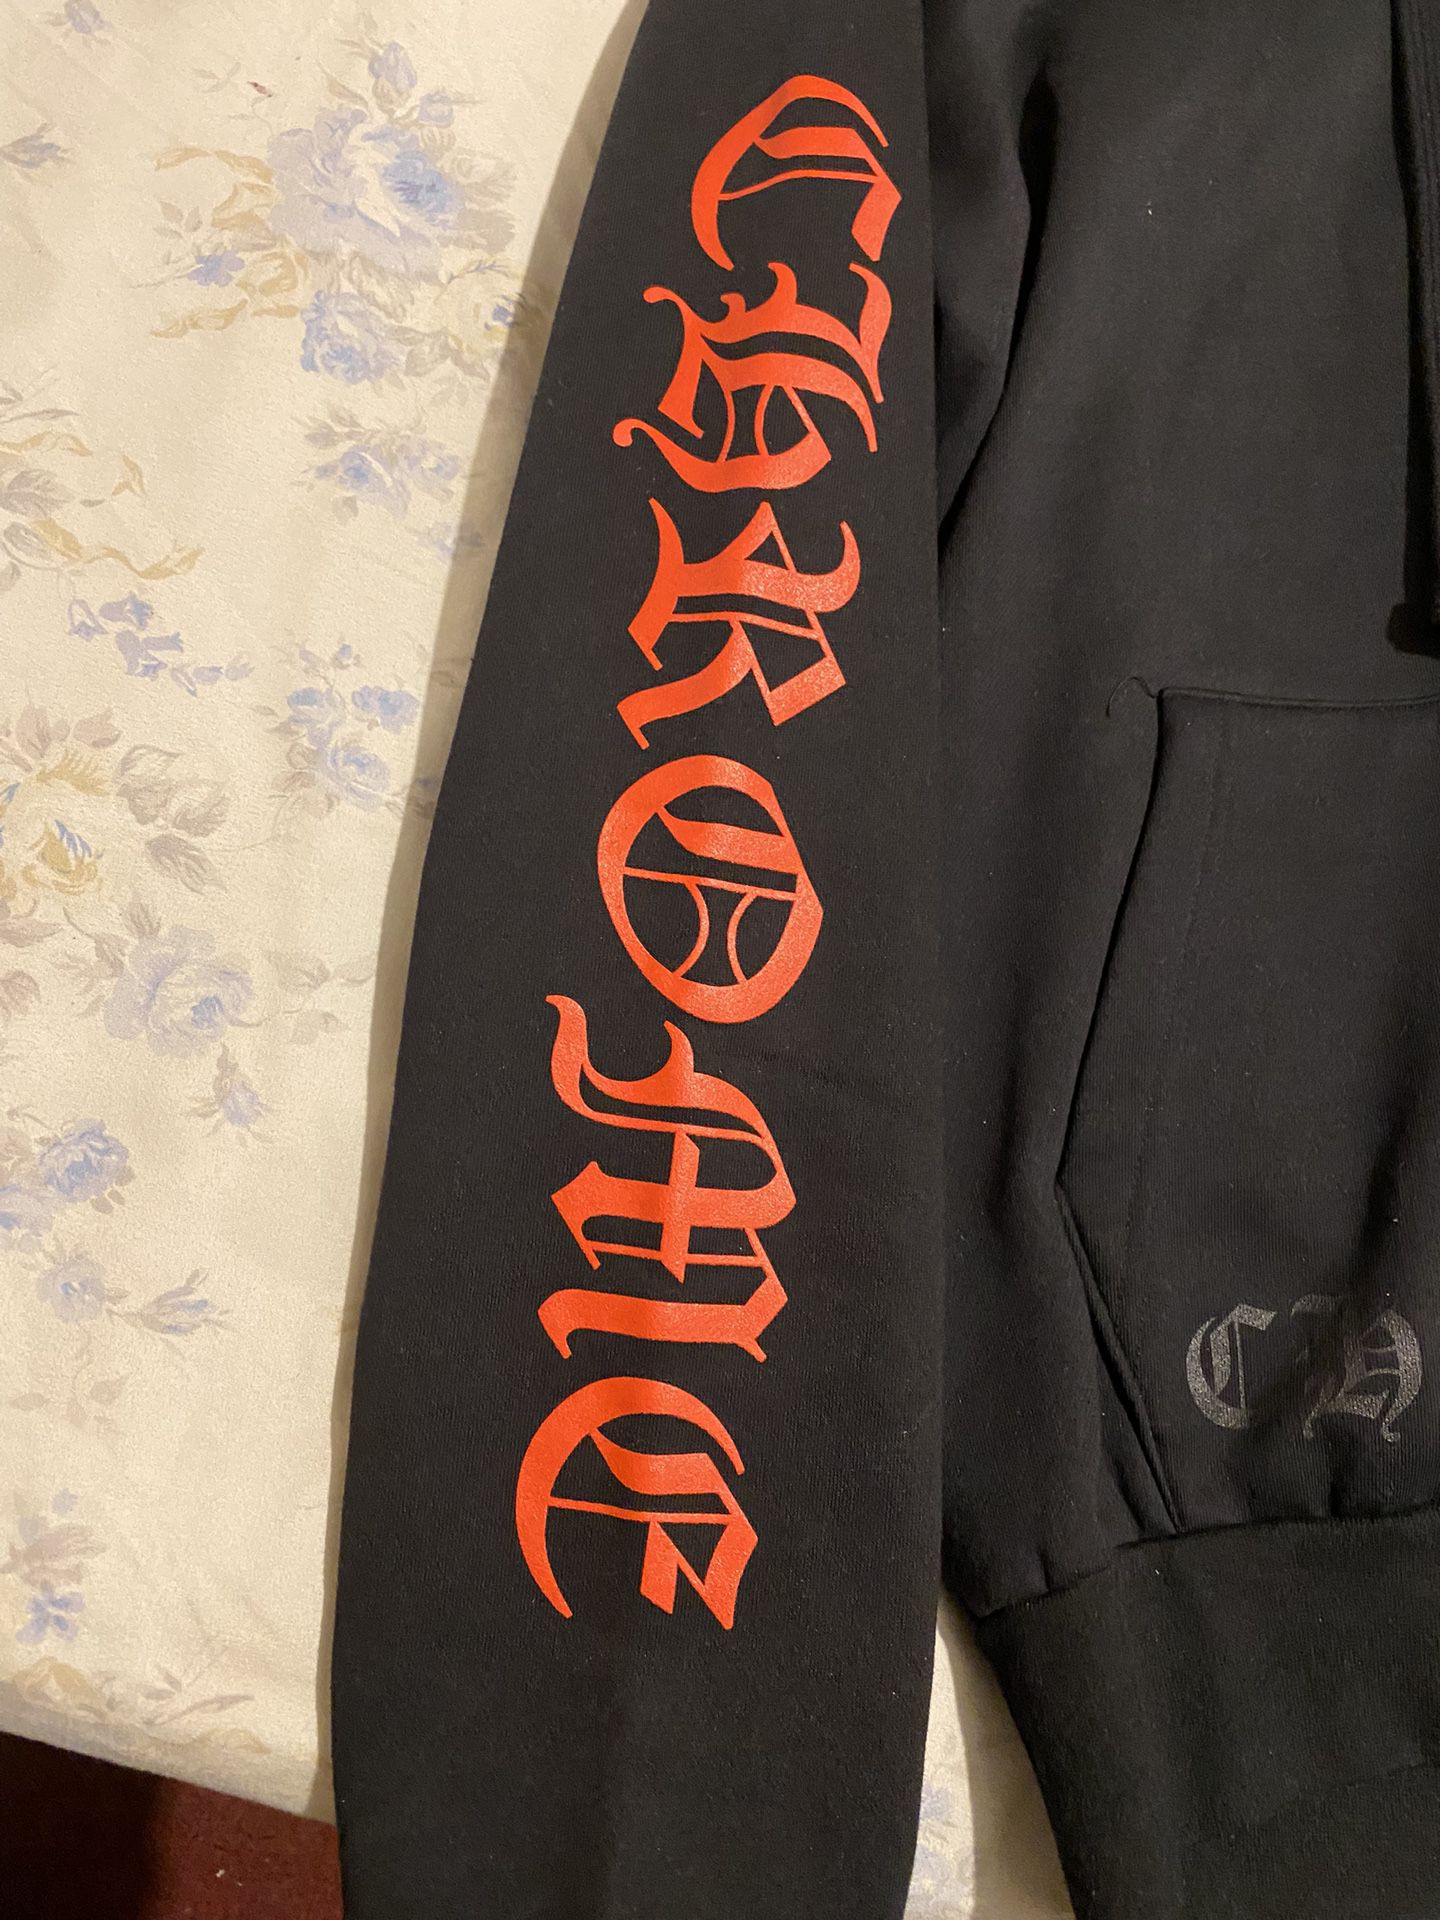 Chrome Hearts Hoodie Brand New-M for Sale in Brooklyn, NY - OfferUp